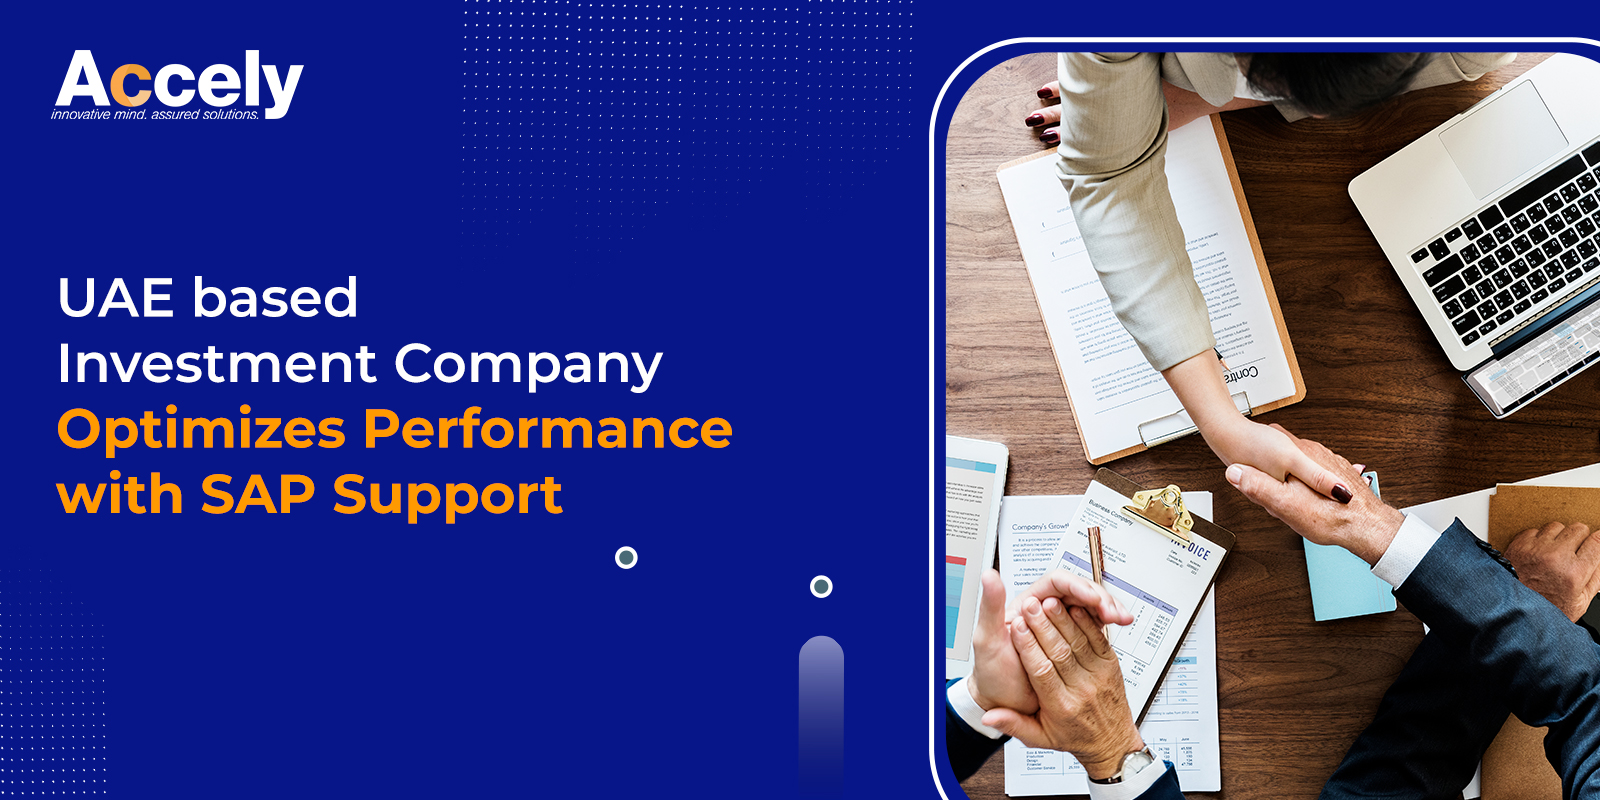 UAE based Investment Company Optimizes Performance with SAP Support